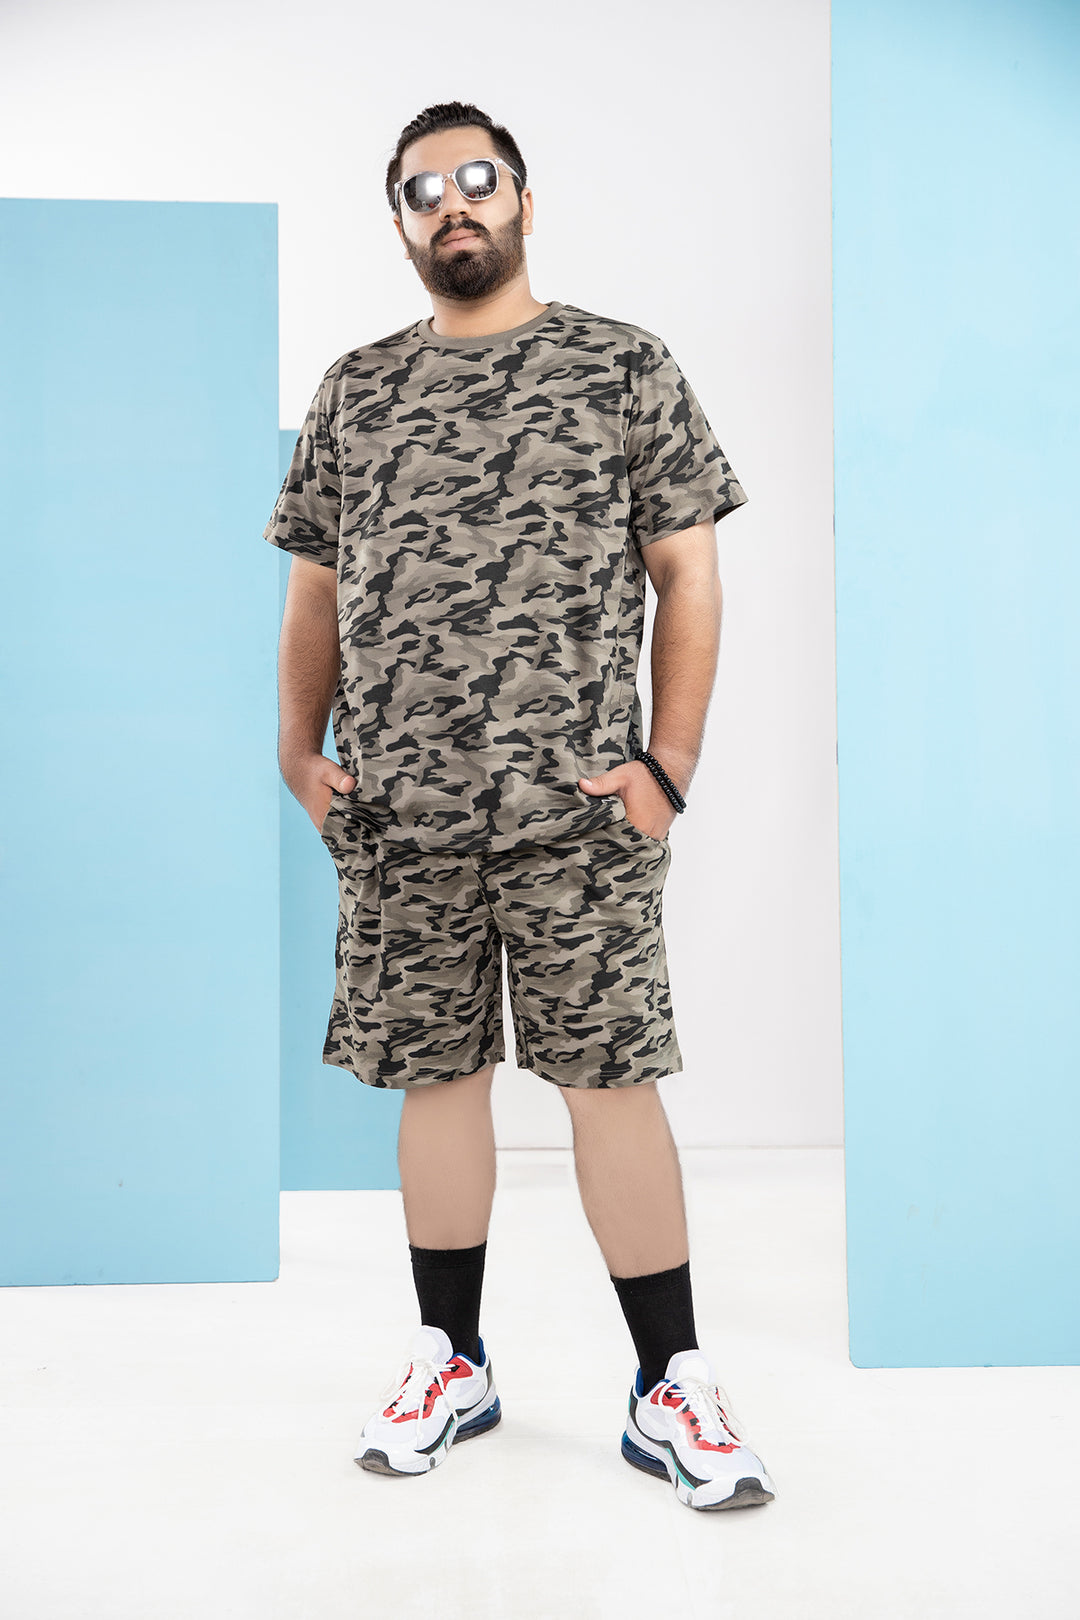 Green Camouflage T-Shirt (Plus Size) - S21 - MT0093P